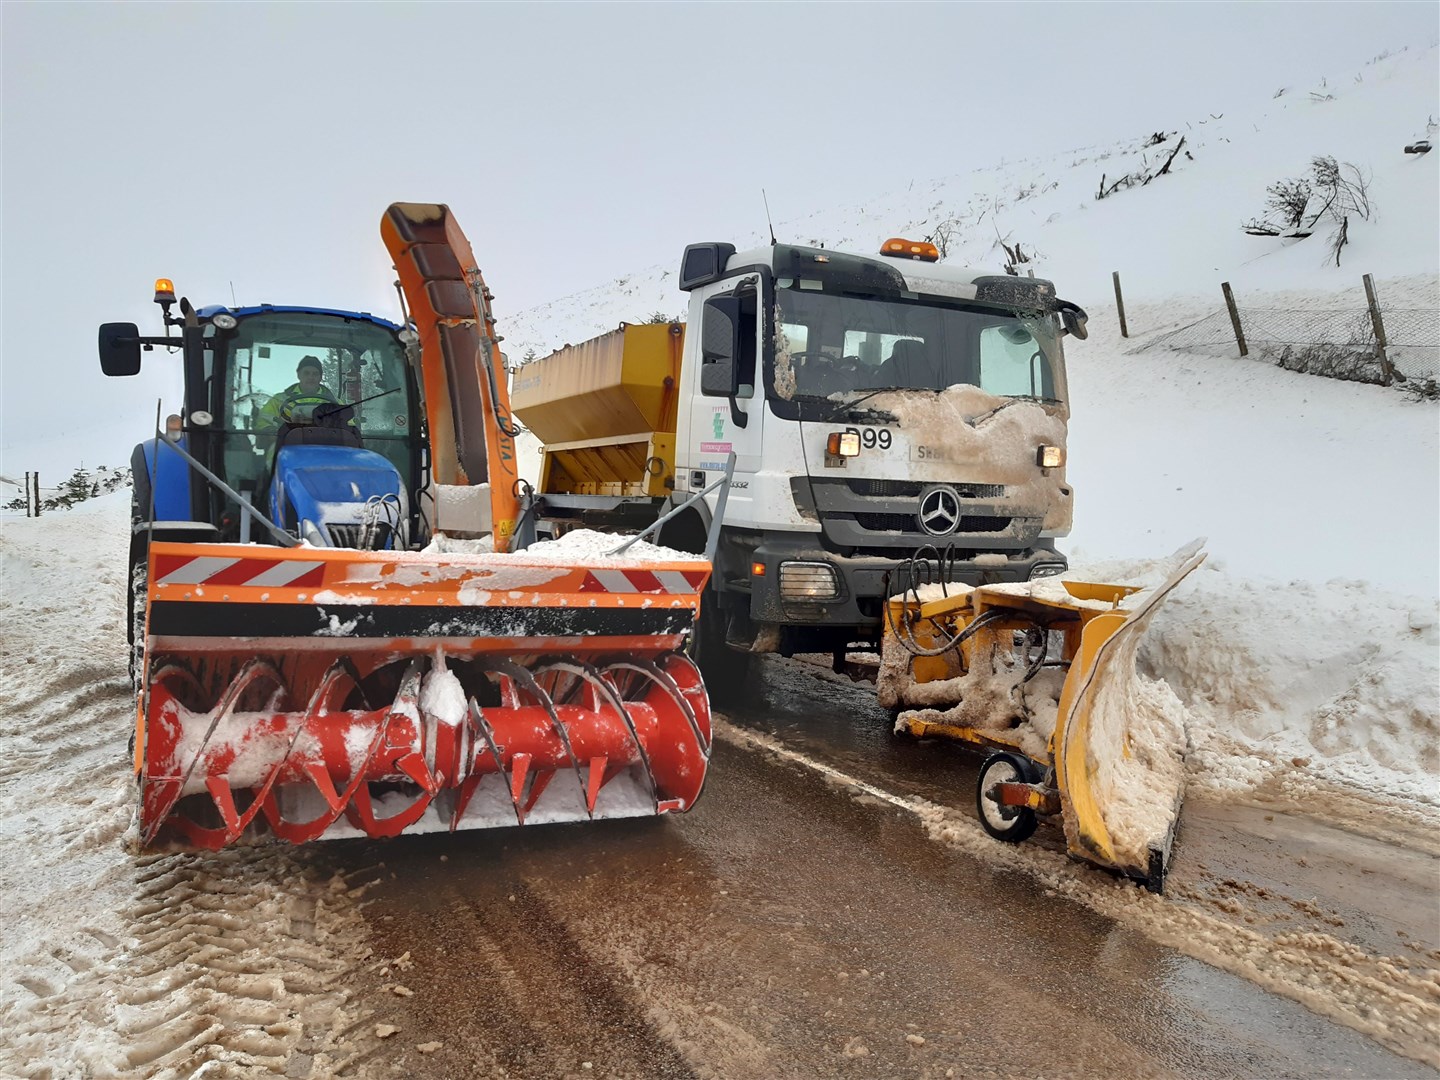 Clearing the roads around the Tomintoul, Glenlivet and the Lecht is no easy feat.